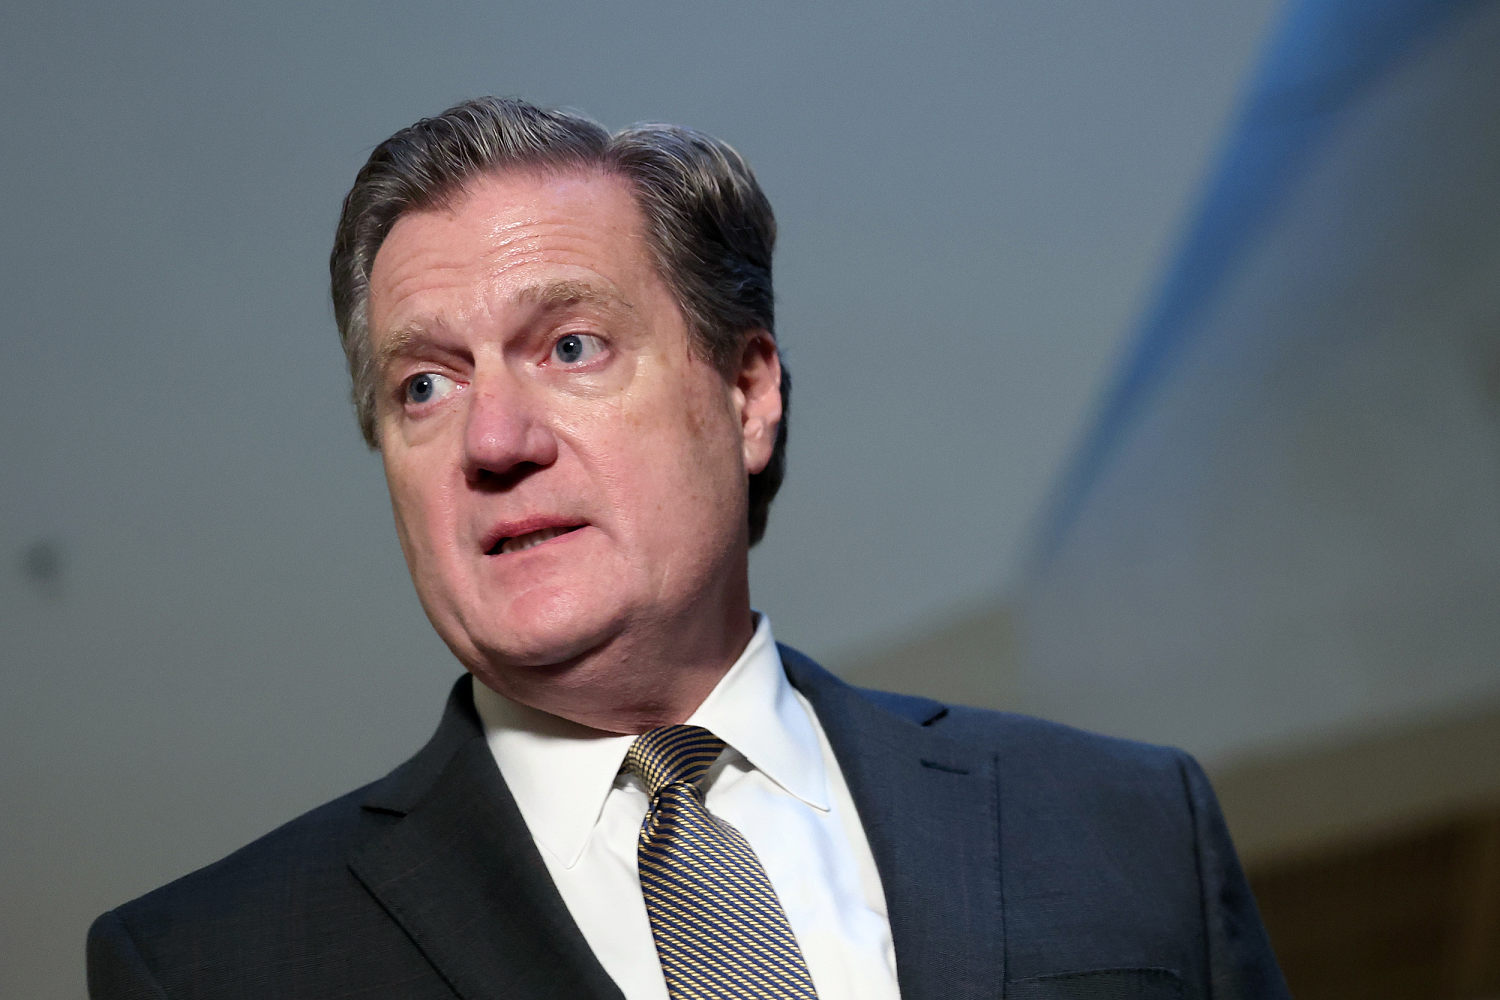 rep. mike turner: the white house seemed to be 'sleepwalking' on russian nuclear threat